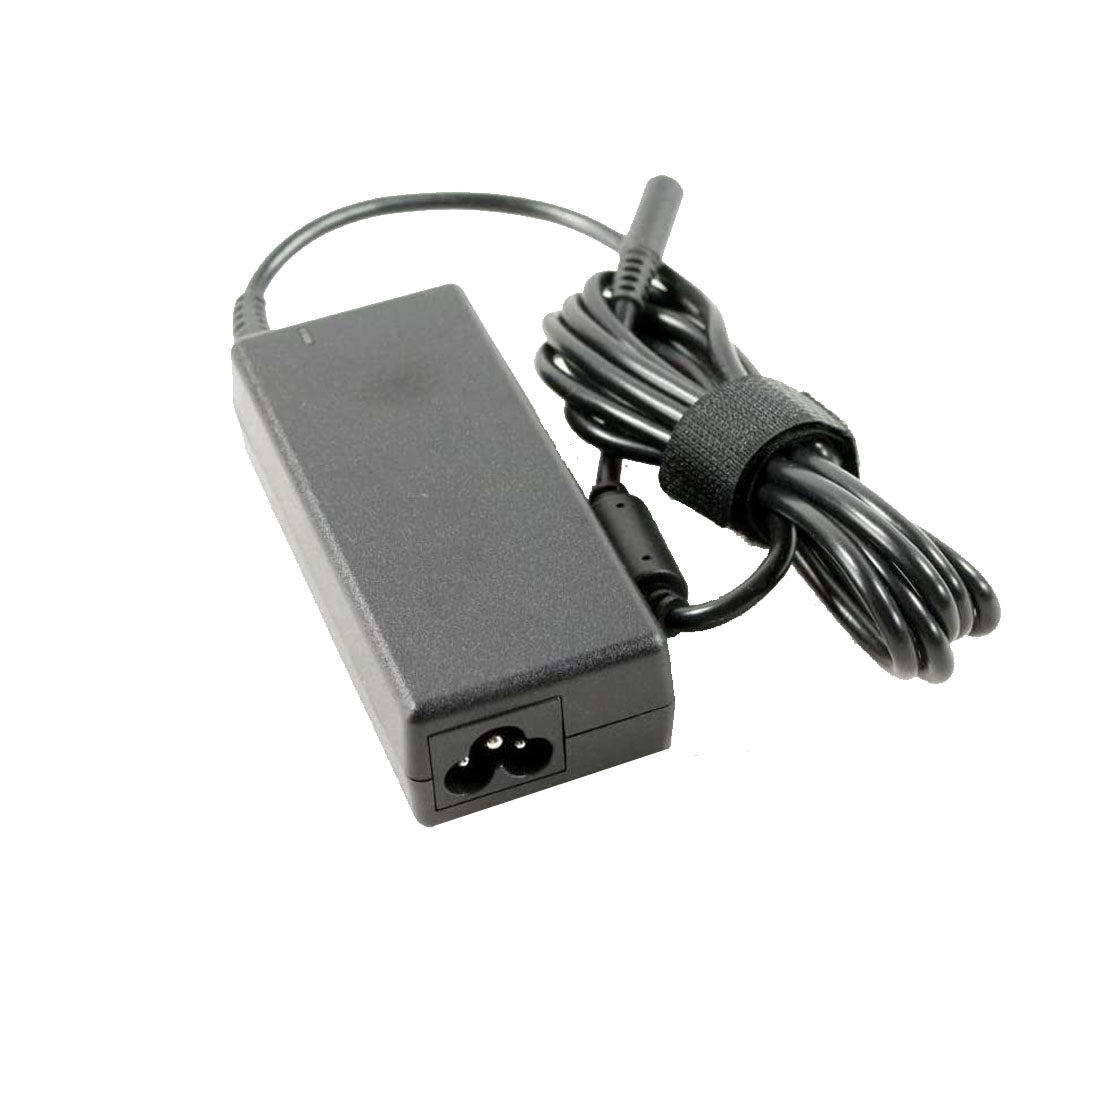 Dell Original 65W 19.5V 4.5mm Pin Laptop Charger Adapter for Inspiron 15 5558 With Power Cord